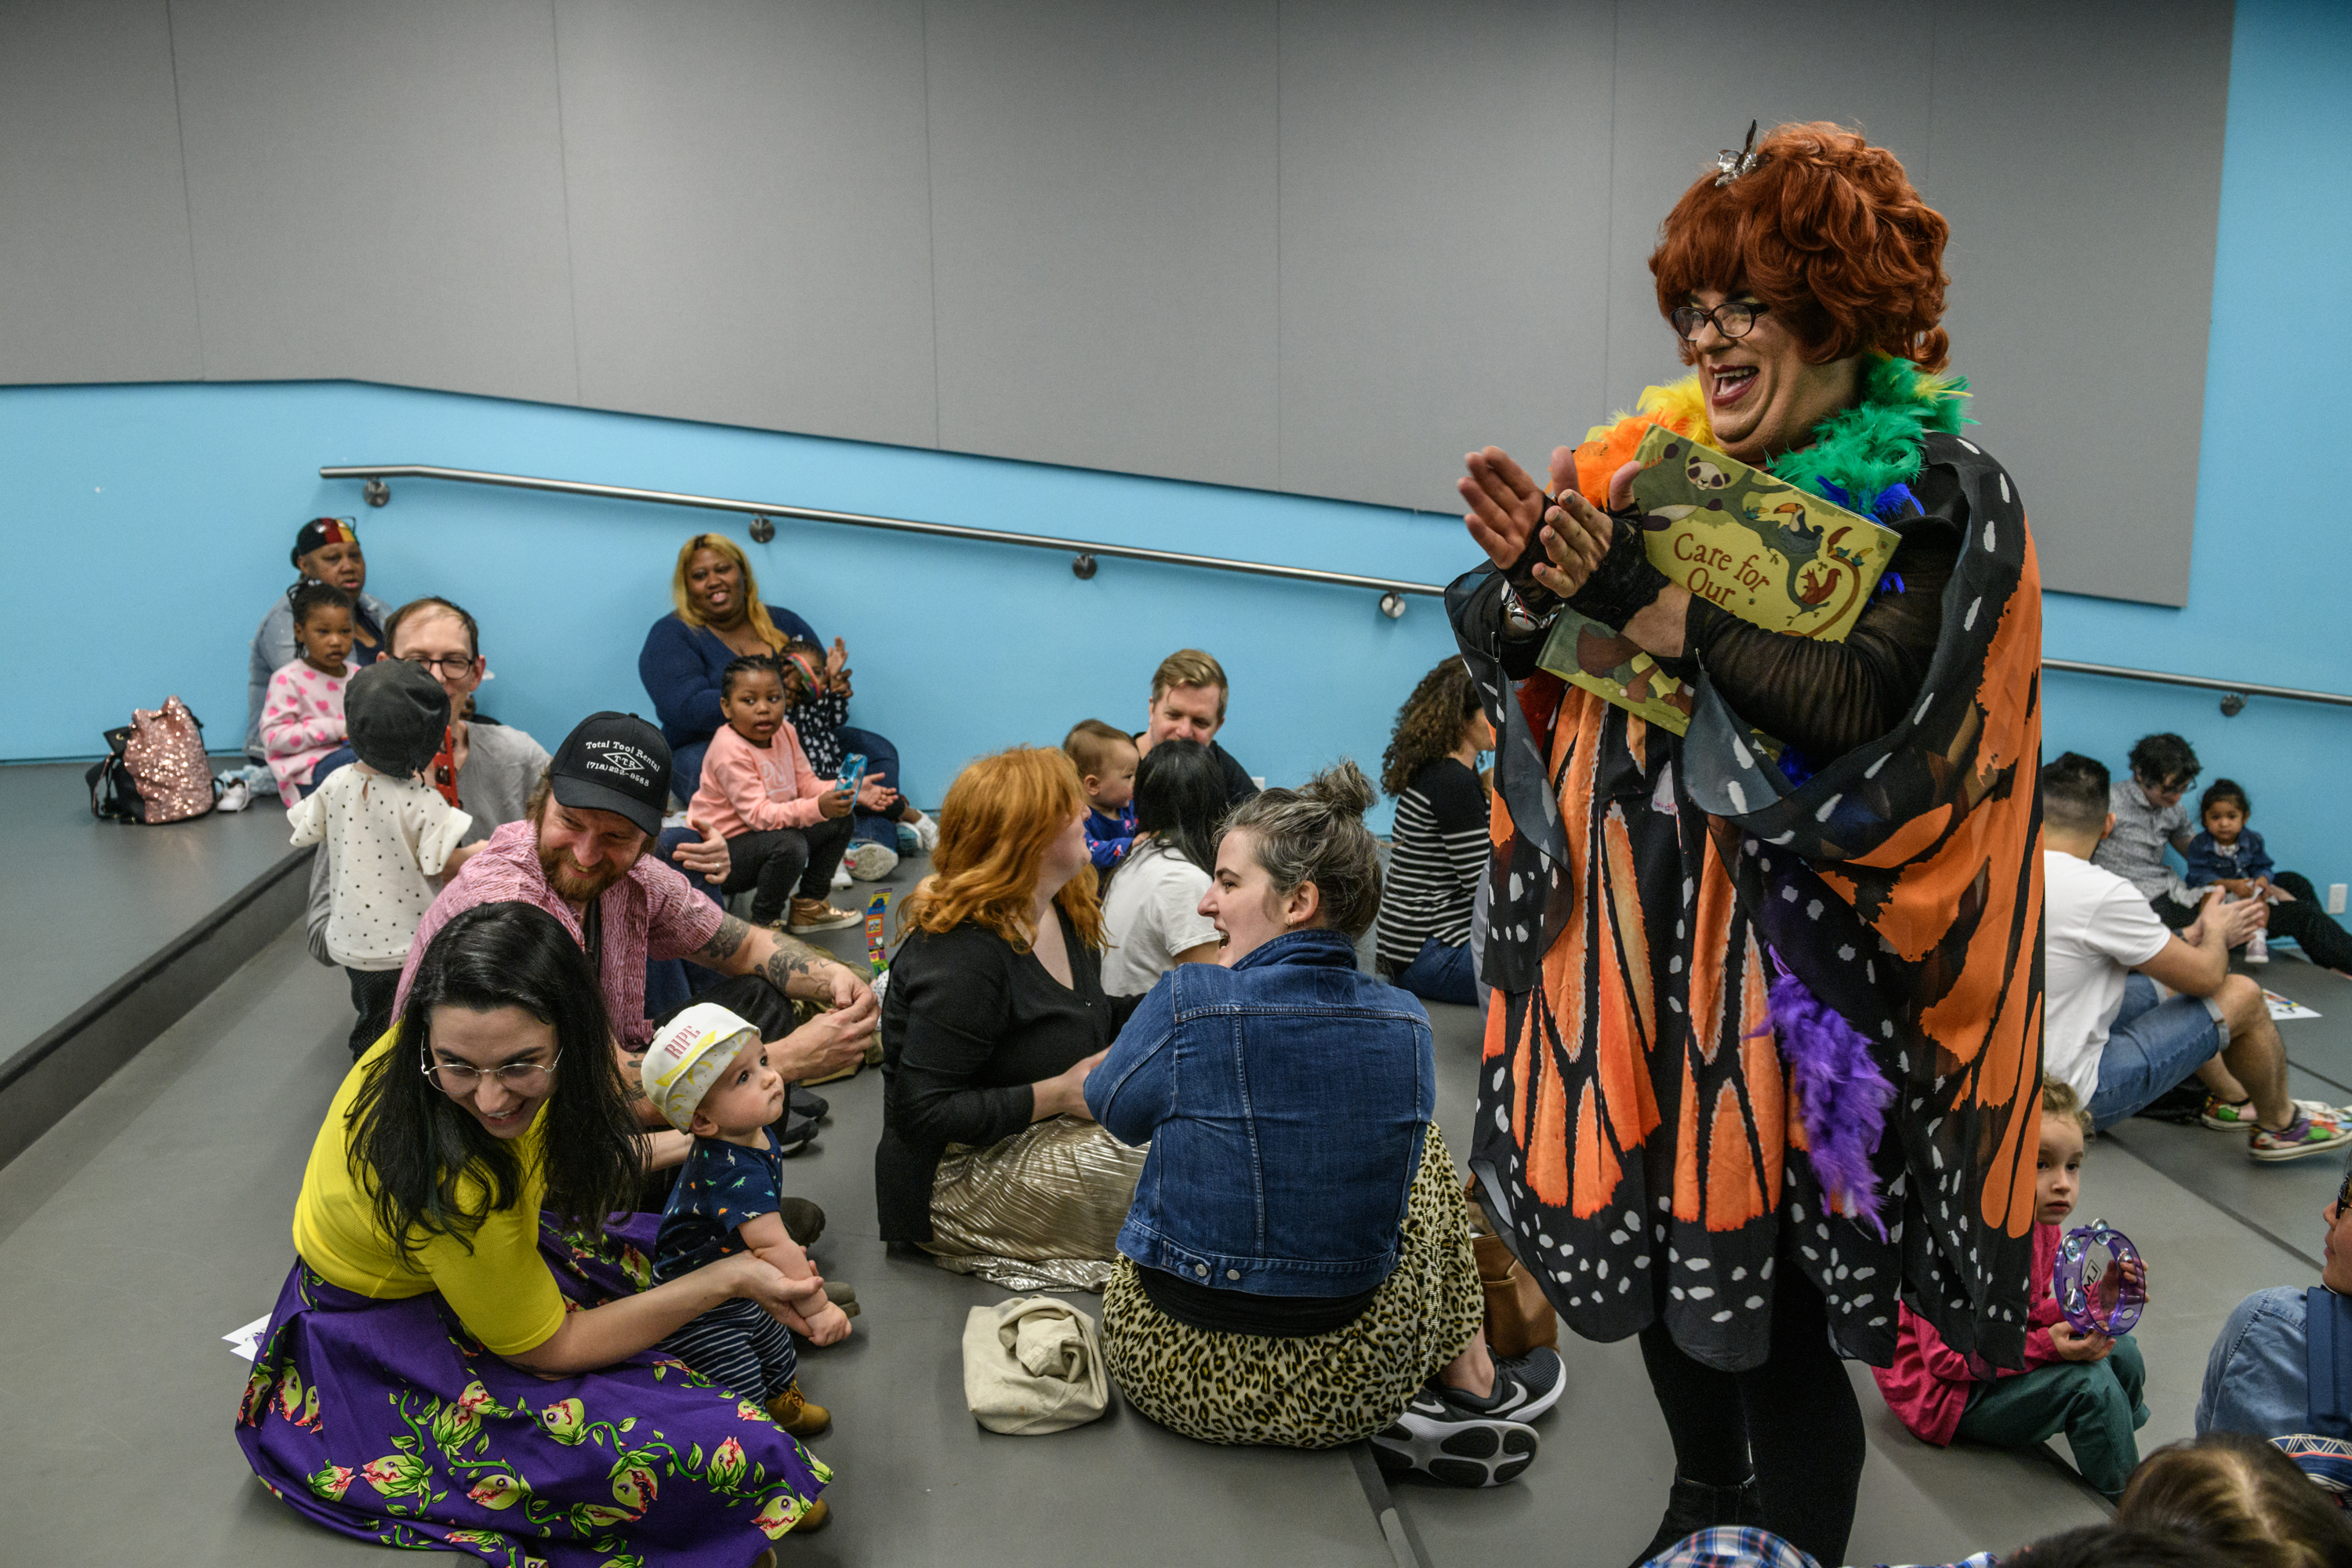 2018-New York- Earth Day Drag Queen Story Hour with Rev. Yolanda at Brooklyn Children’s Museum